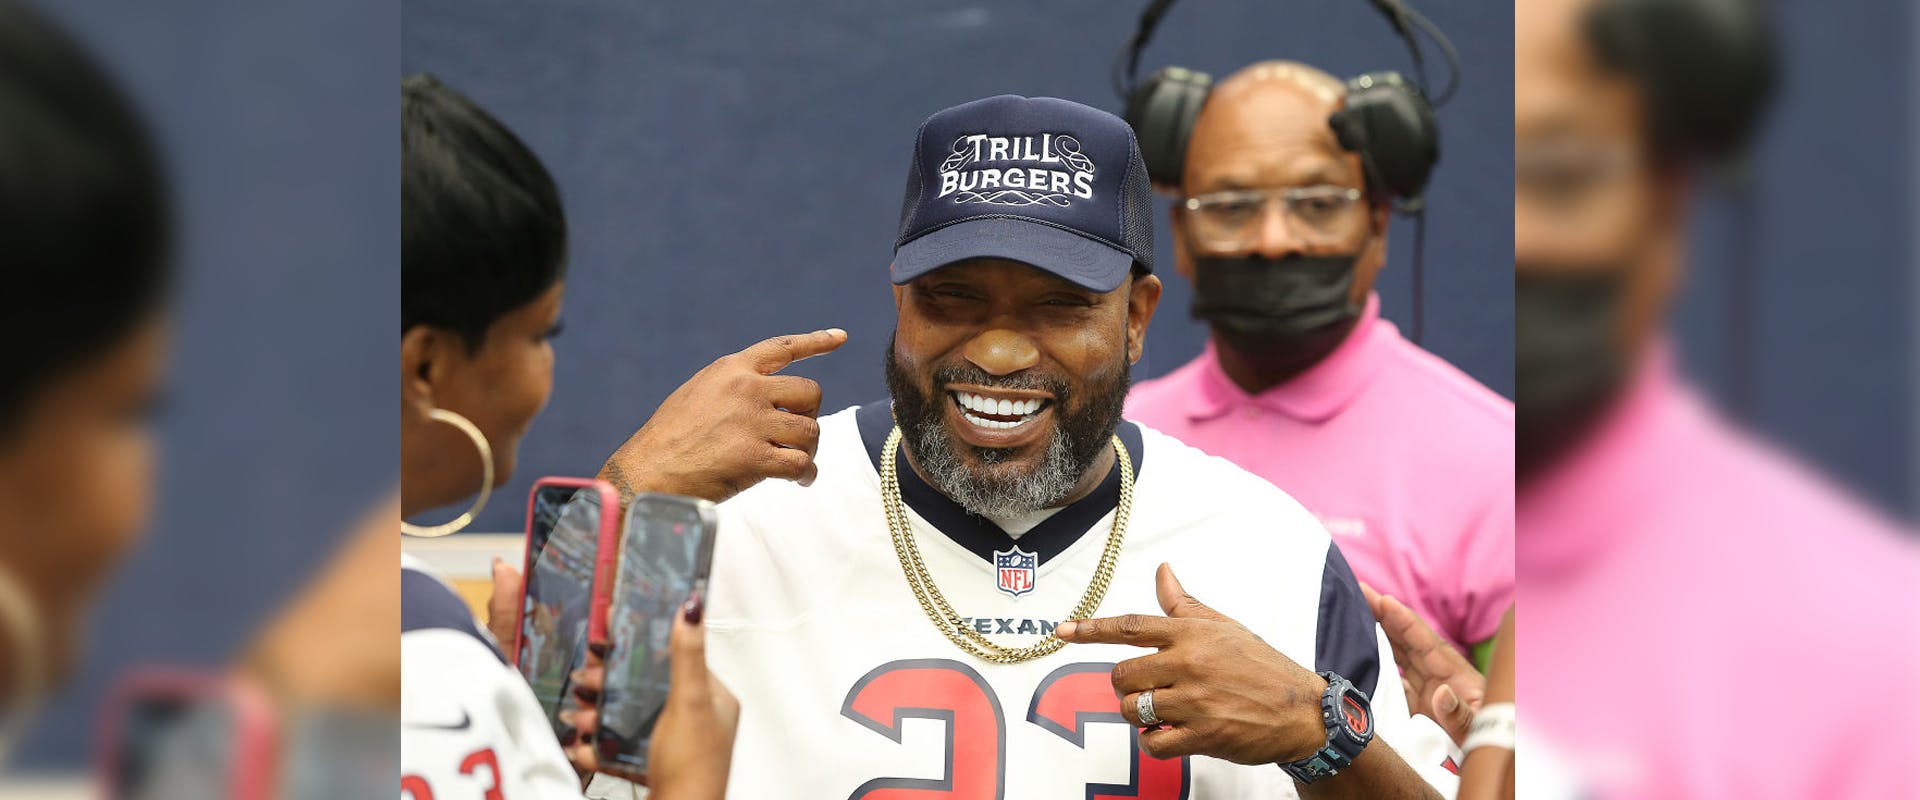 Indianapolis Colts v Houston Texans
HOUSTON, TEXAS - SEPTEMBER 17: Rapper Bun B participates in pre-game activities before the Indianapolis Colts play the Houston Texans at NRG Stadium on September 17, 2023 in Houston, Texas. 